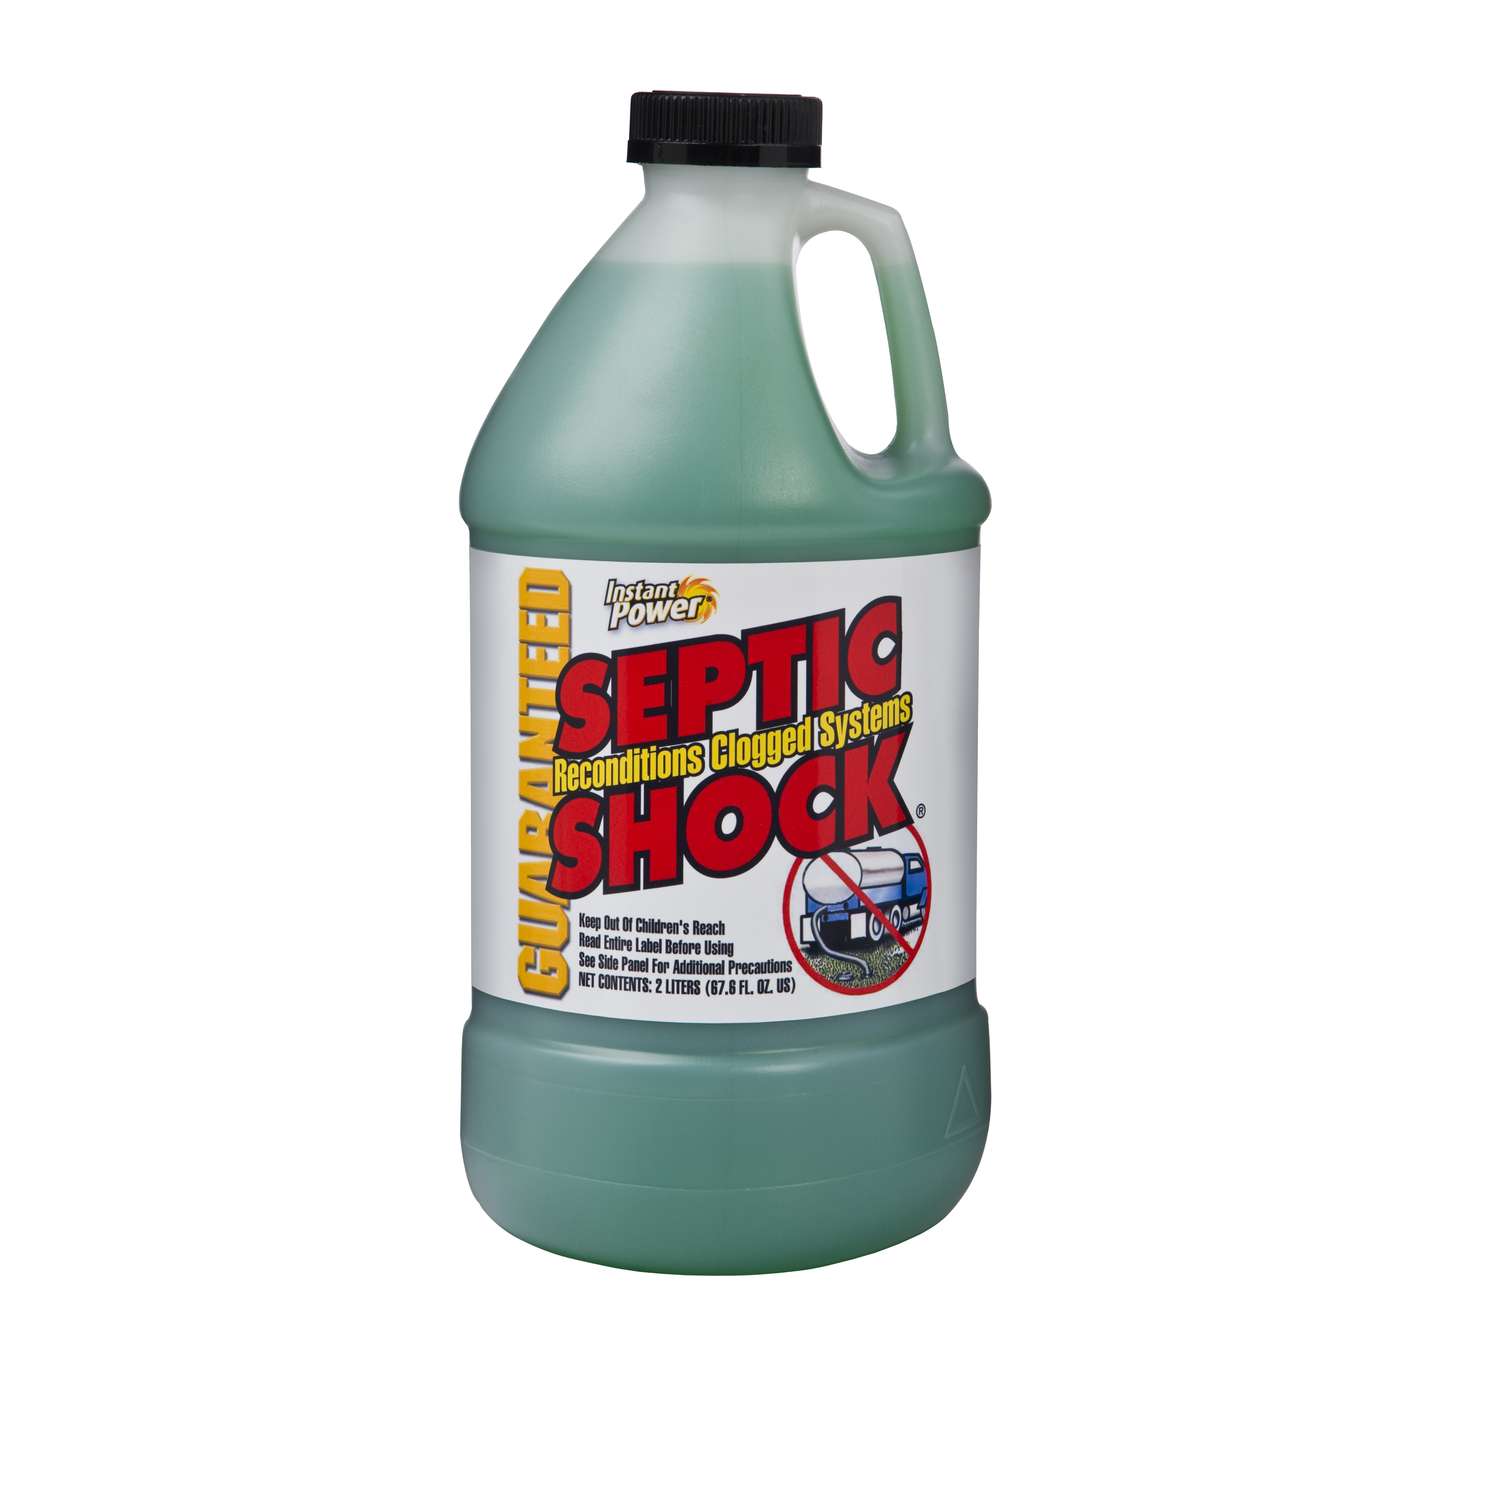 RID-X Liquid Septic System Treatment and Cleaner 24 oz - Ace Hardware